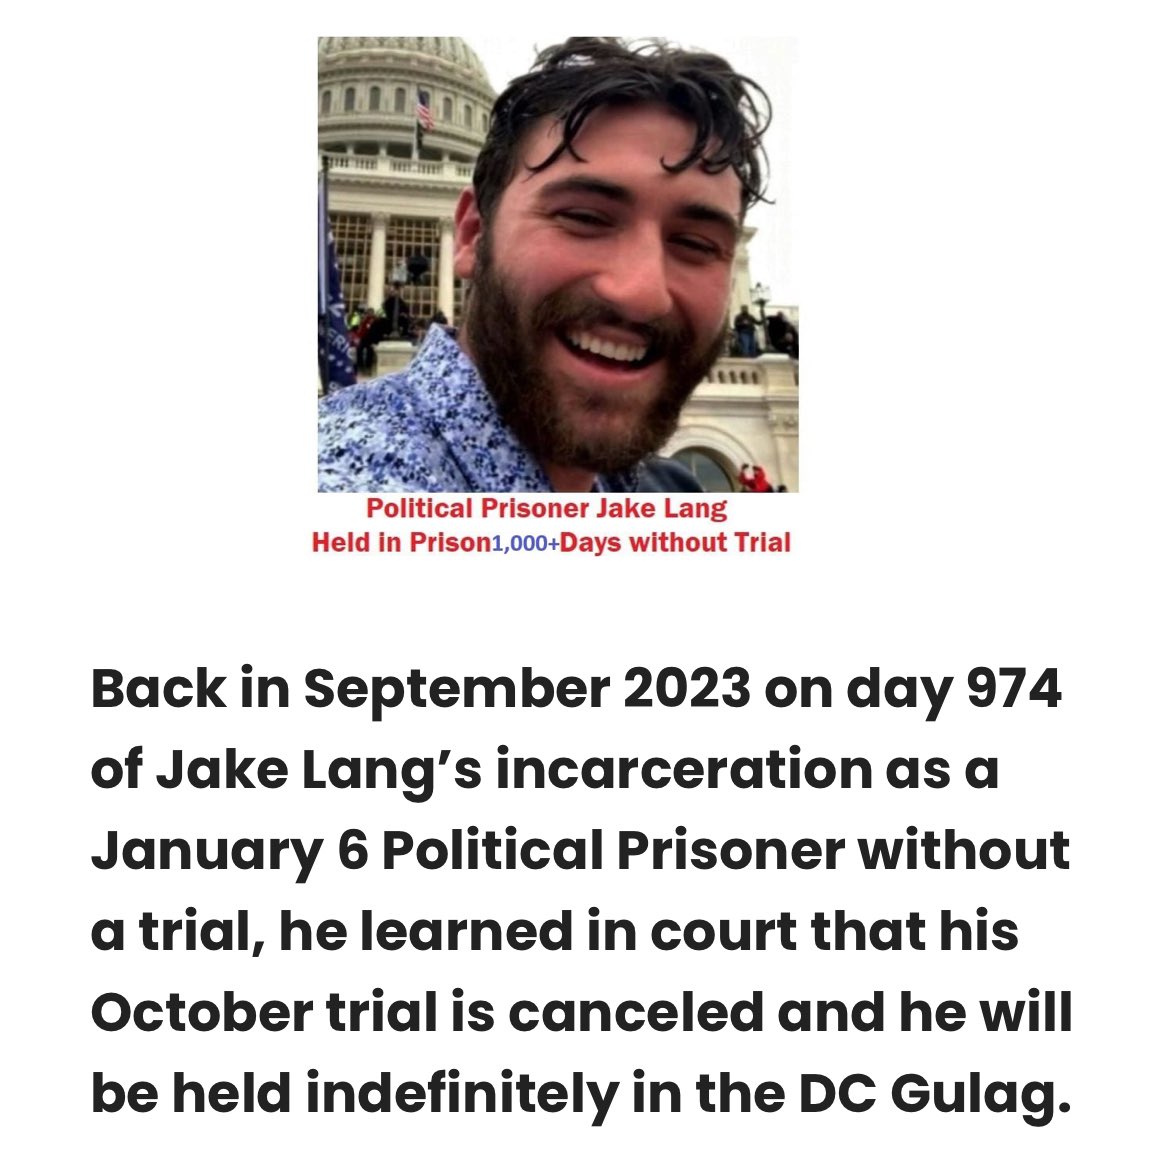 J6 political prisoner Jake Lang has been held in jail for 1000 days with NO TRIAL! His October trial date was canceled and his new trial date is Sept 2024. This is OUTRAGEOUS!! 😡